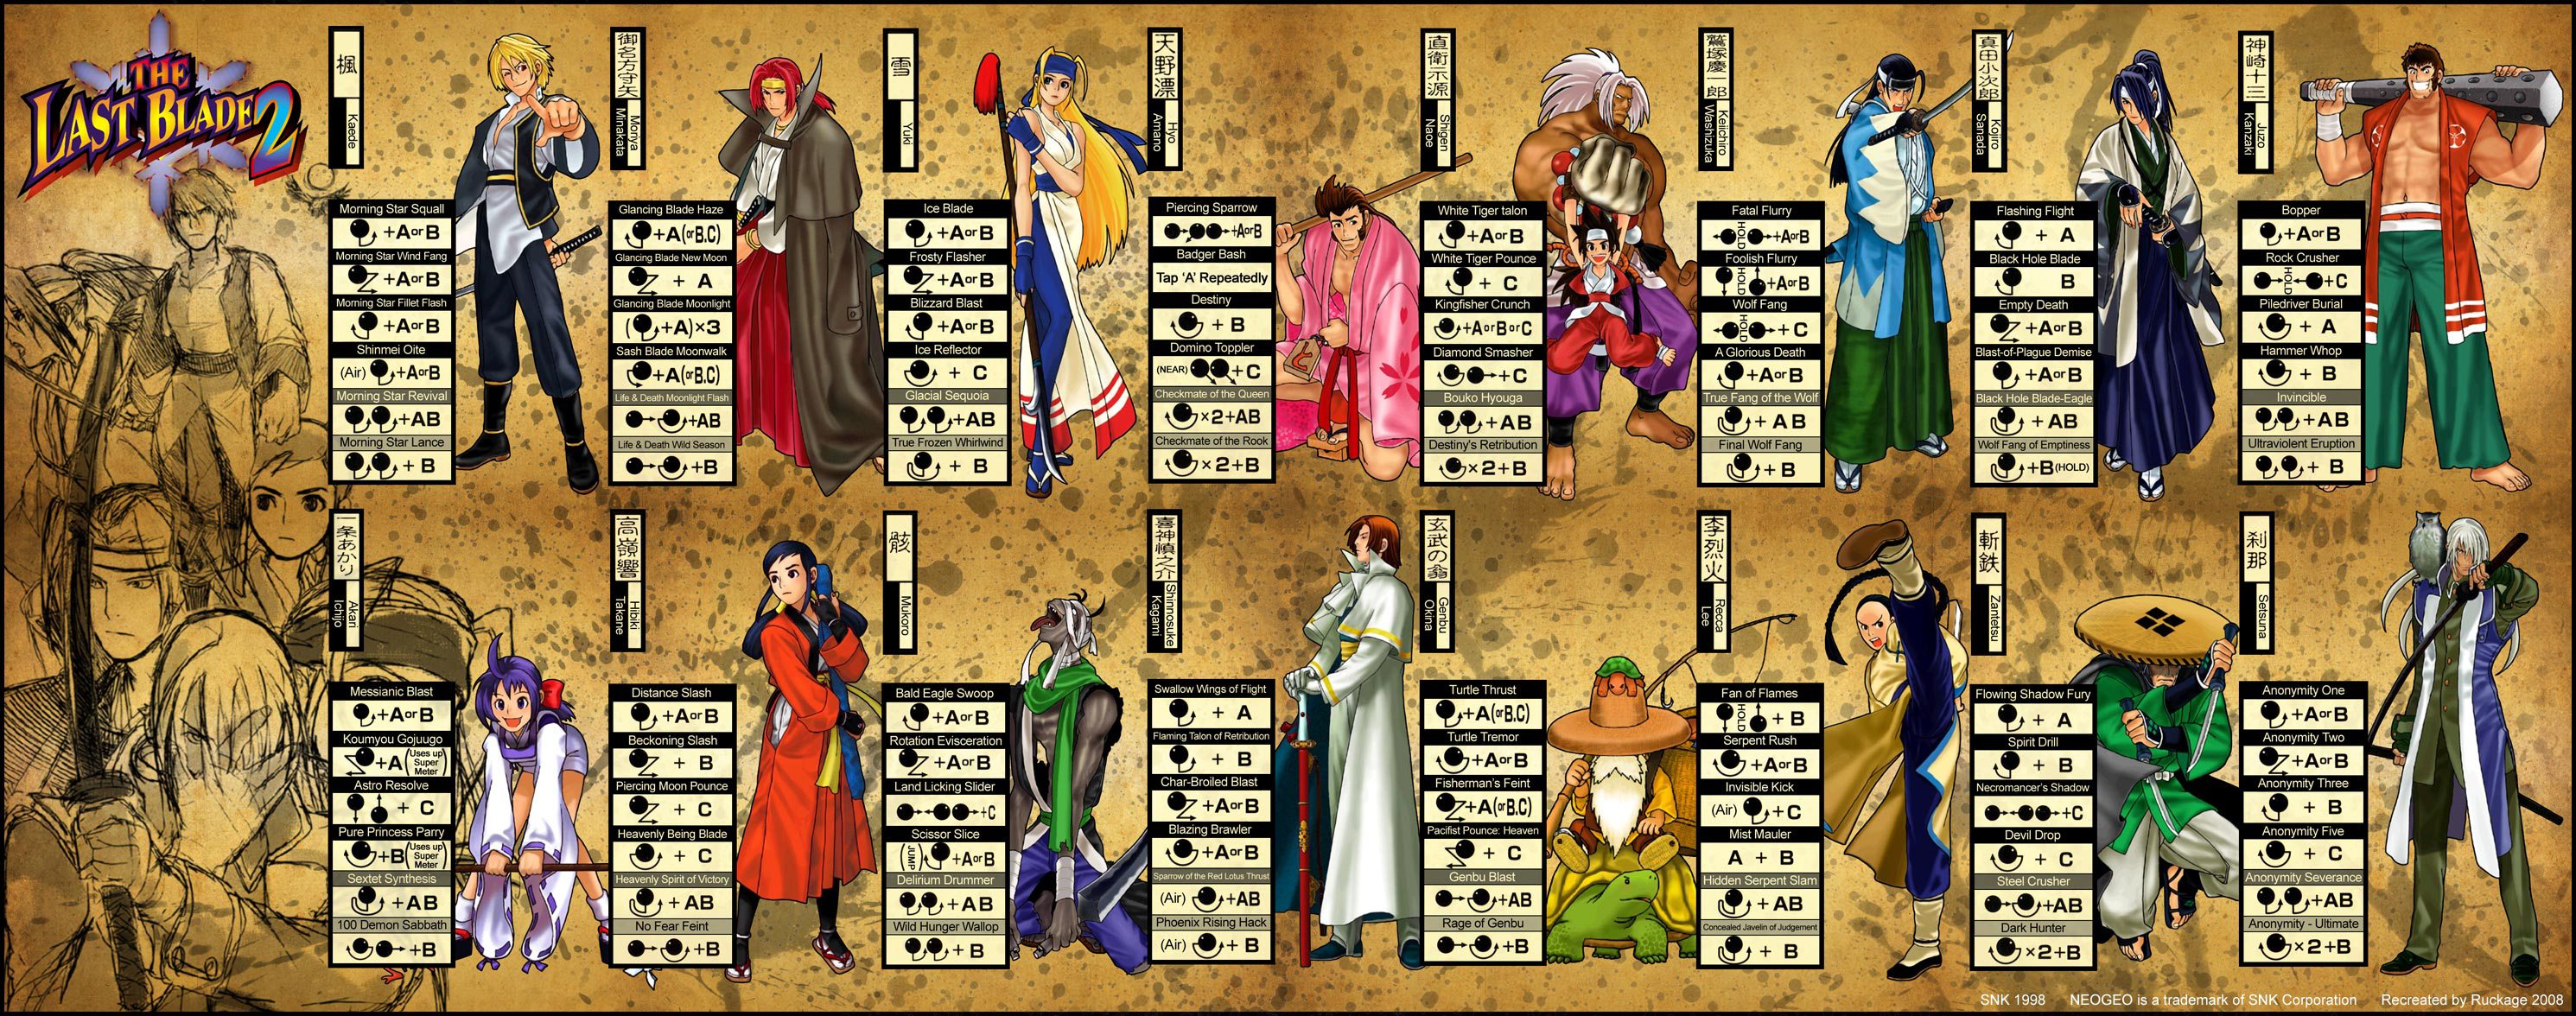 2981x1176 > The Last Blade 2 Wallpapers